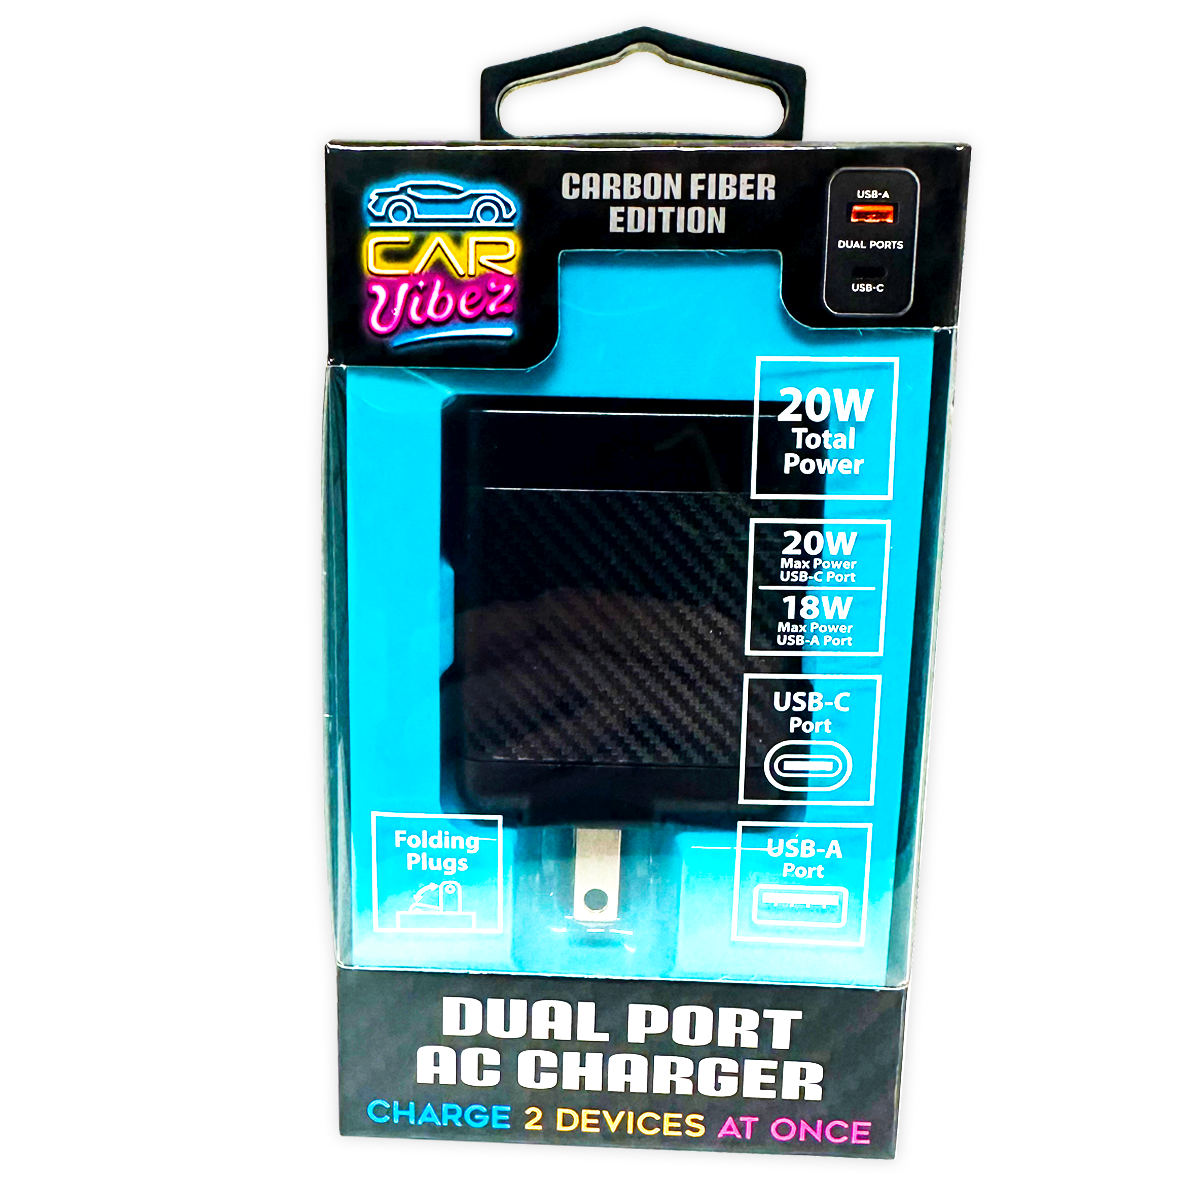 AC Wall Charger Dual USB / USB-C Ports 20 Watts - 3 Pieces Per Pack 24573